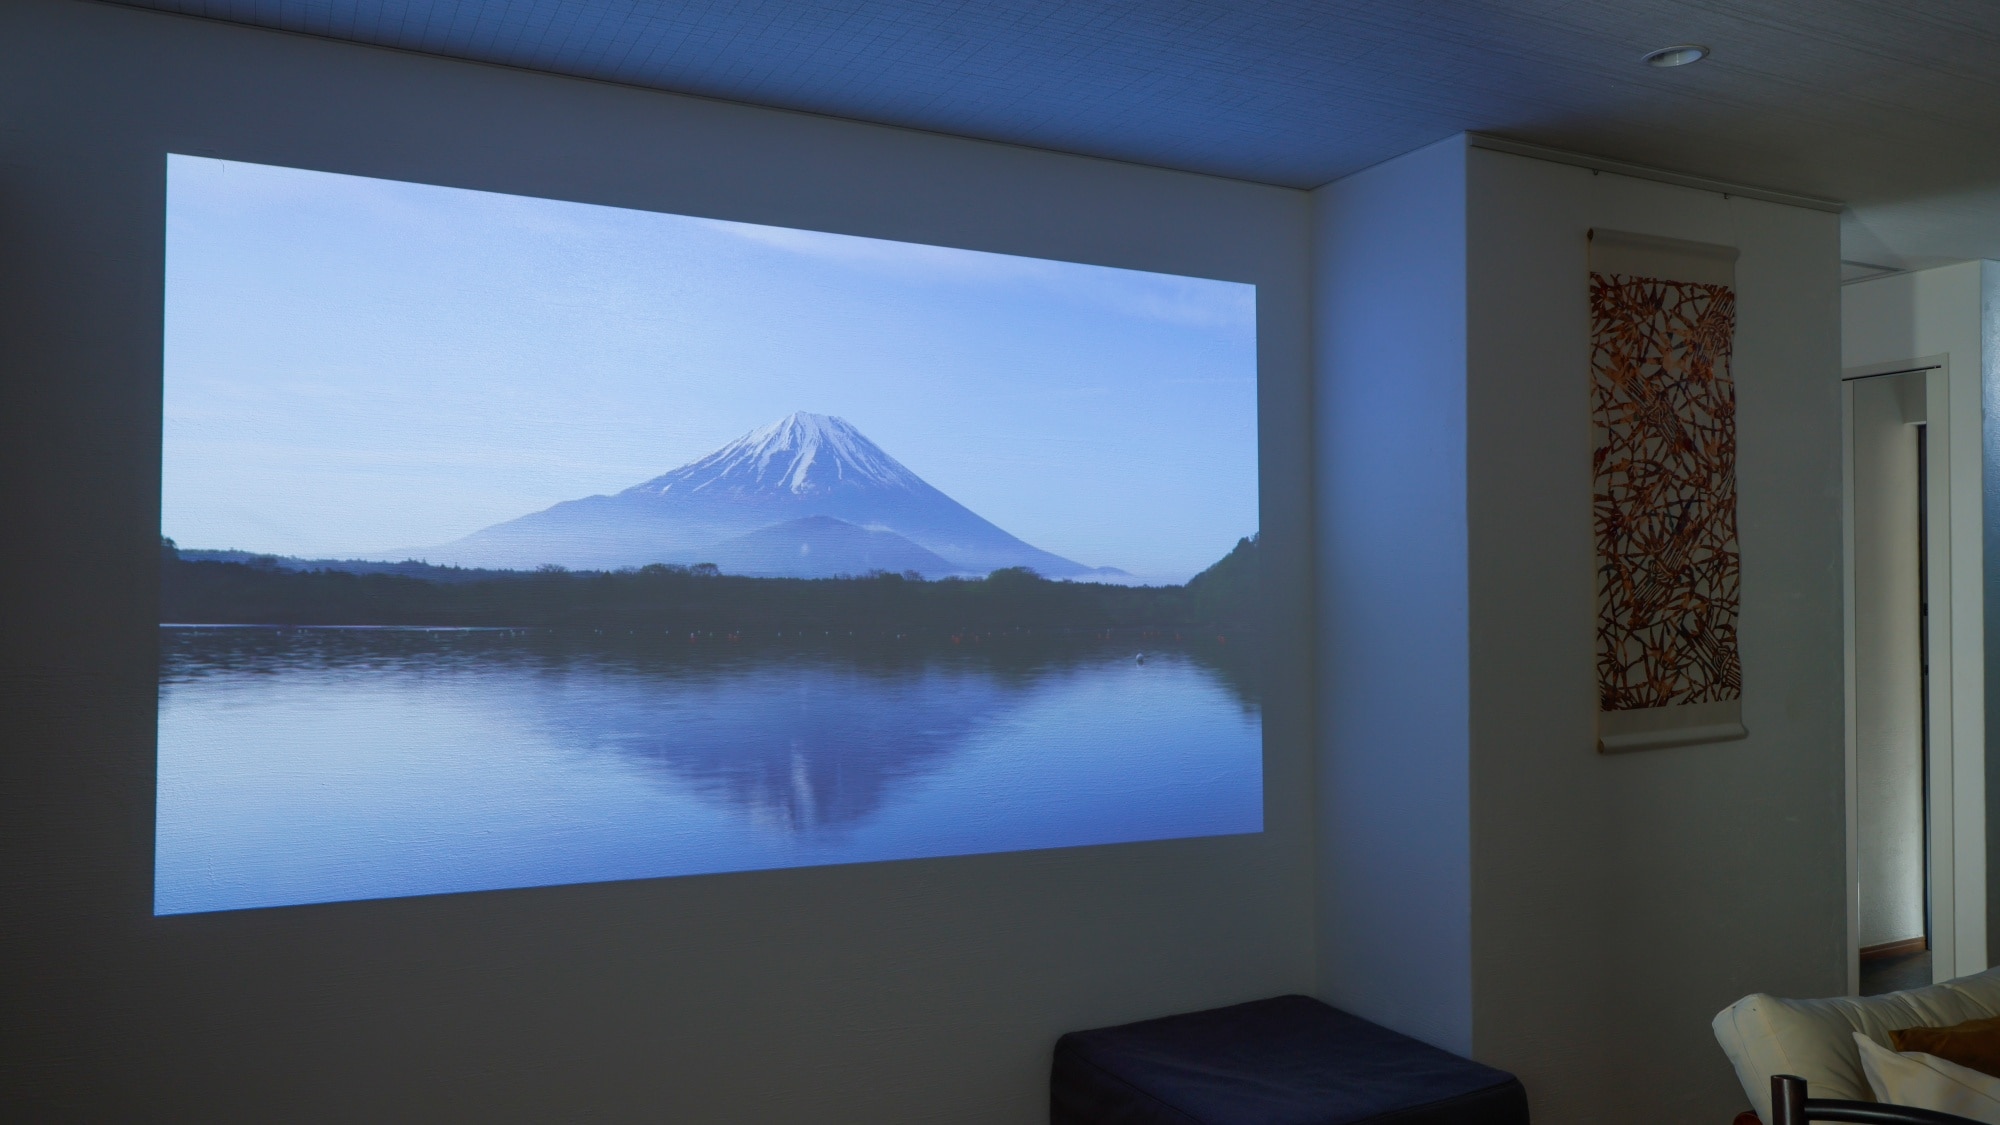 ■ You can enjoy your favorite videos on a large screen with the popIn Aladdin projector.